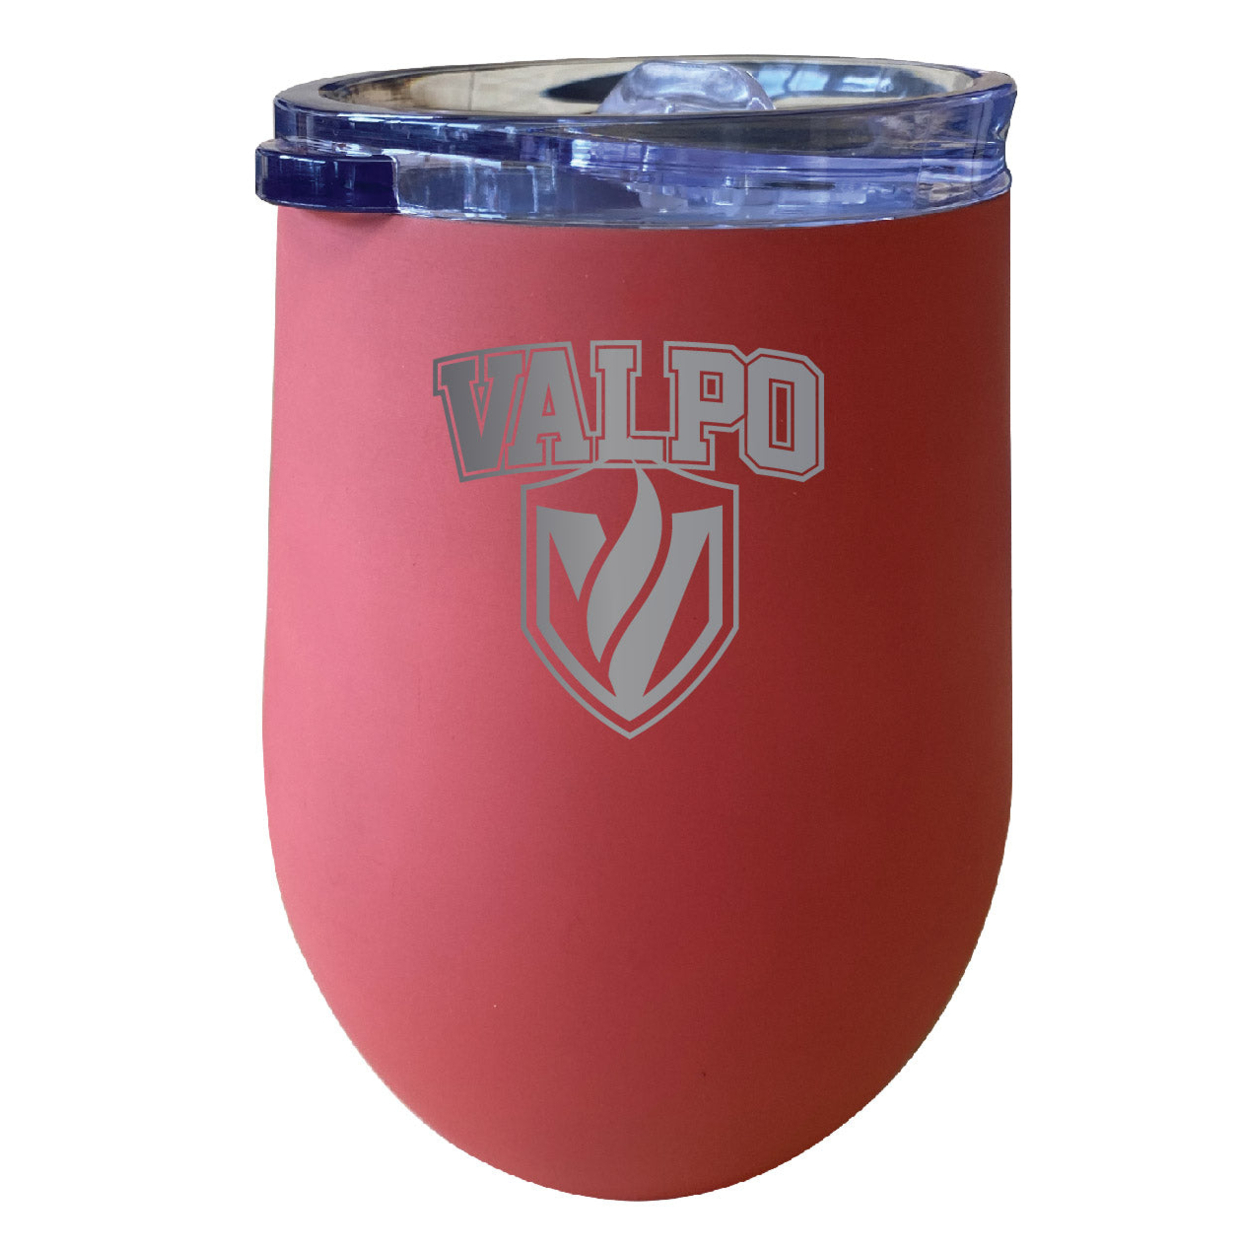 Valparaiso University 12 Oz Etched Insulated Wine Stainless Steel Tumbler - Choose Your Color - Navy